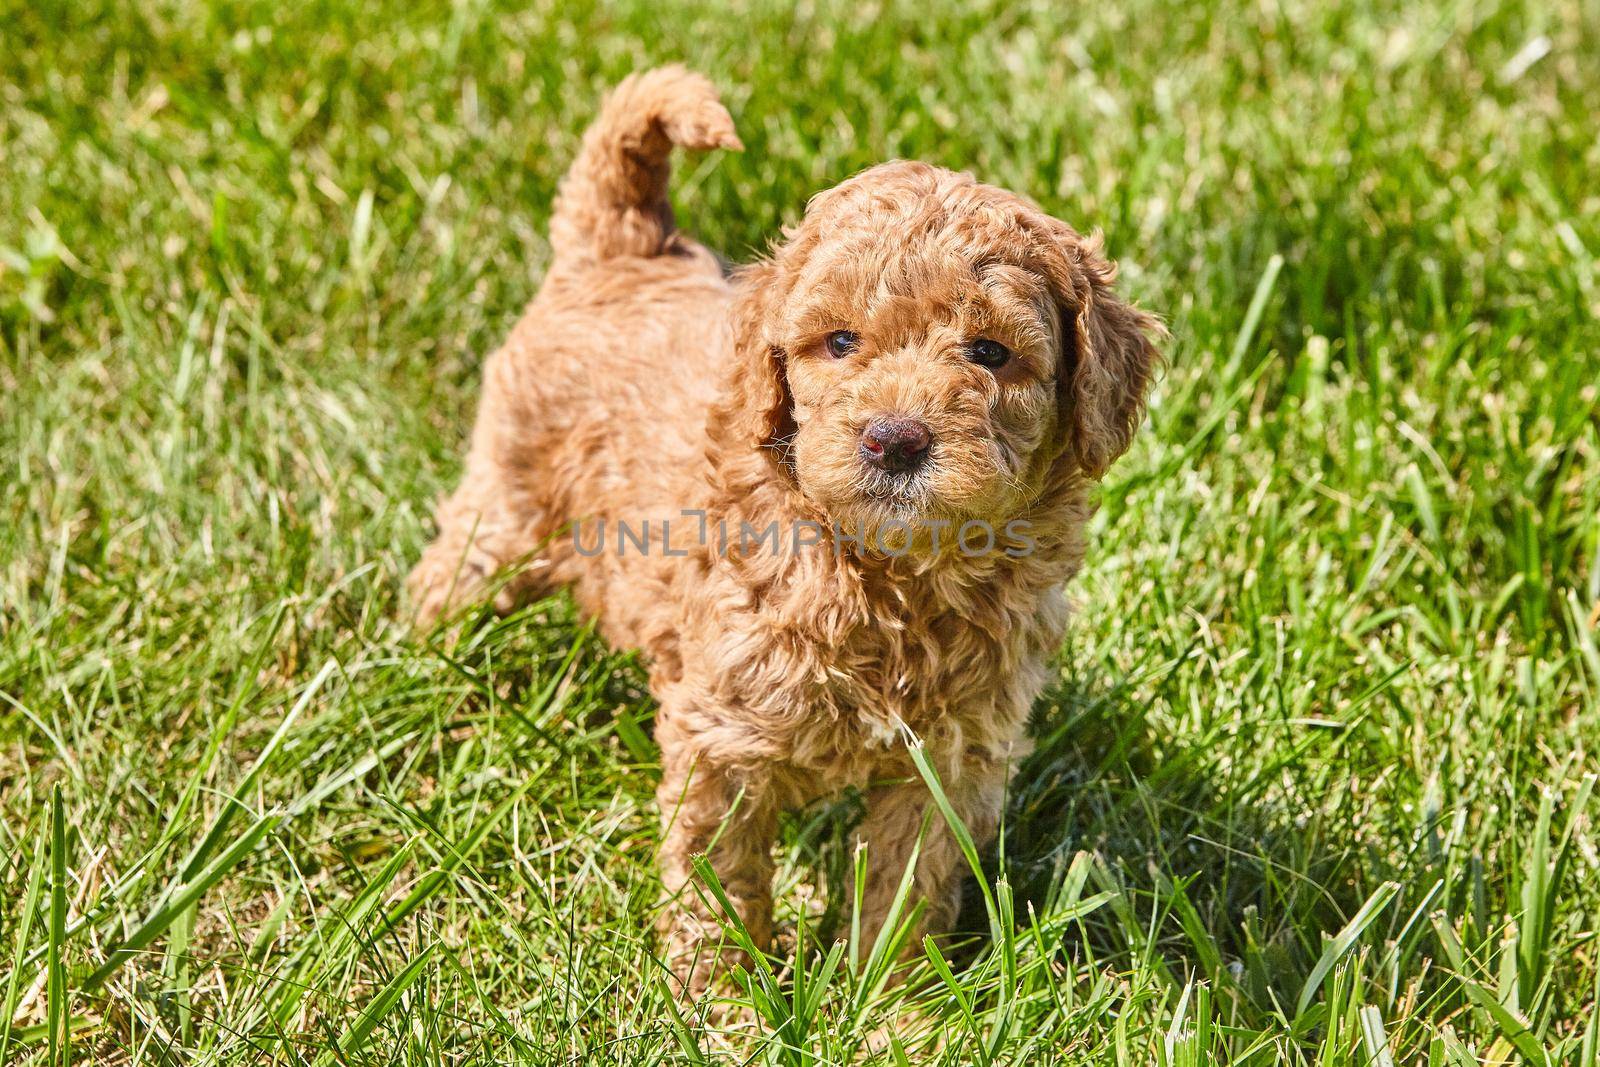 Image of Goldendoodle puppy looking up at you in grass